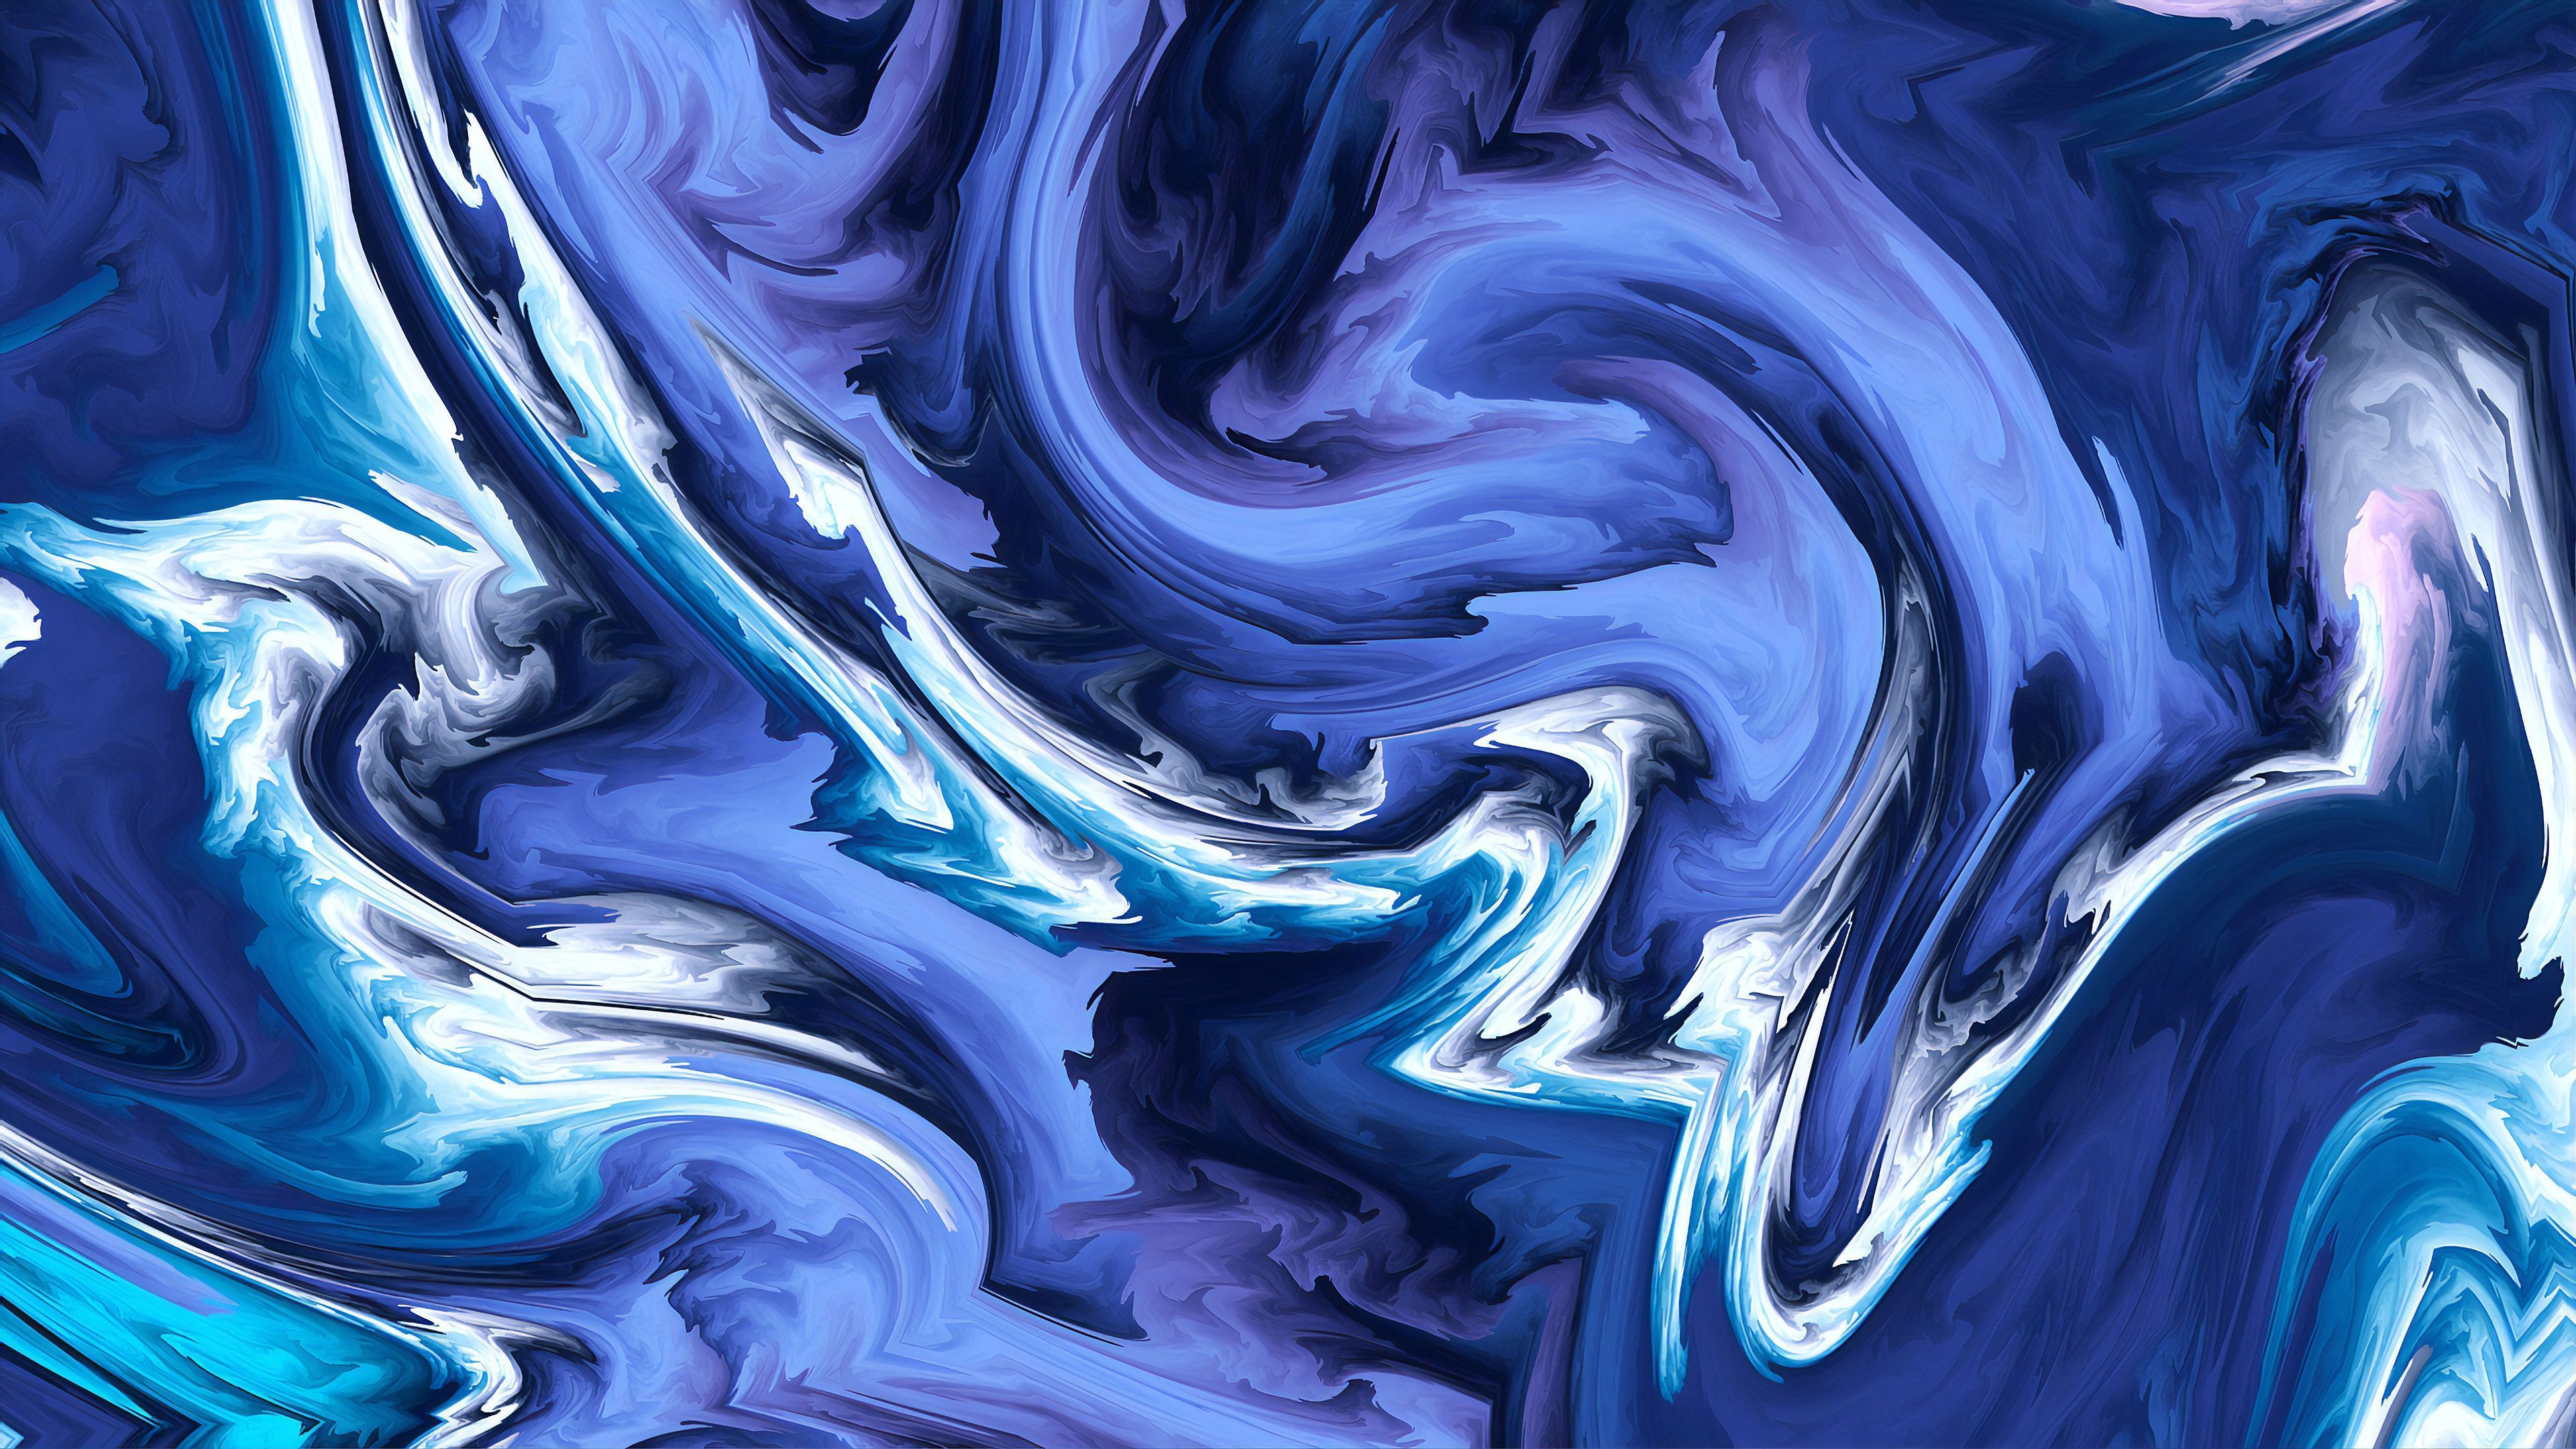 A blue and white abstract painting - Blue, 3840x2160, HD